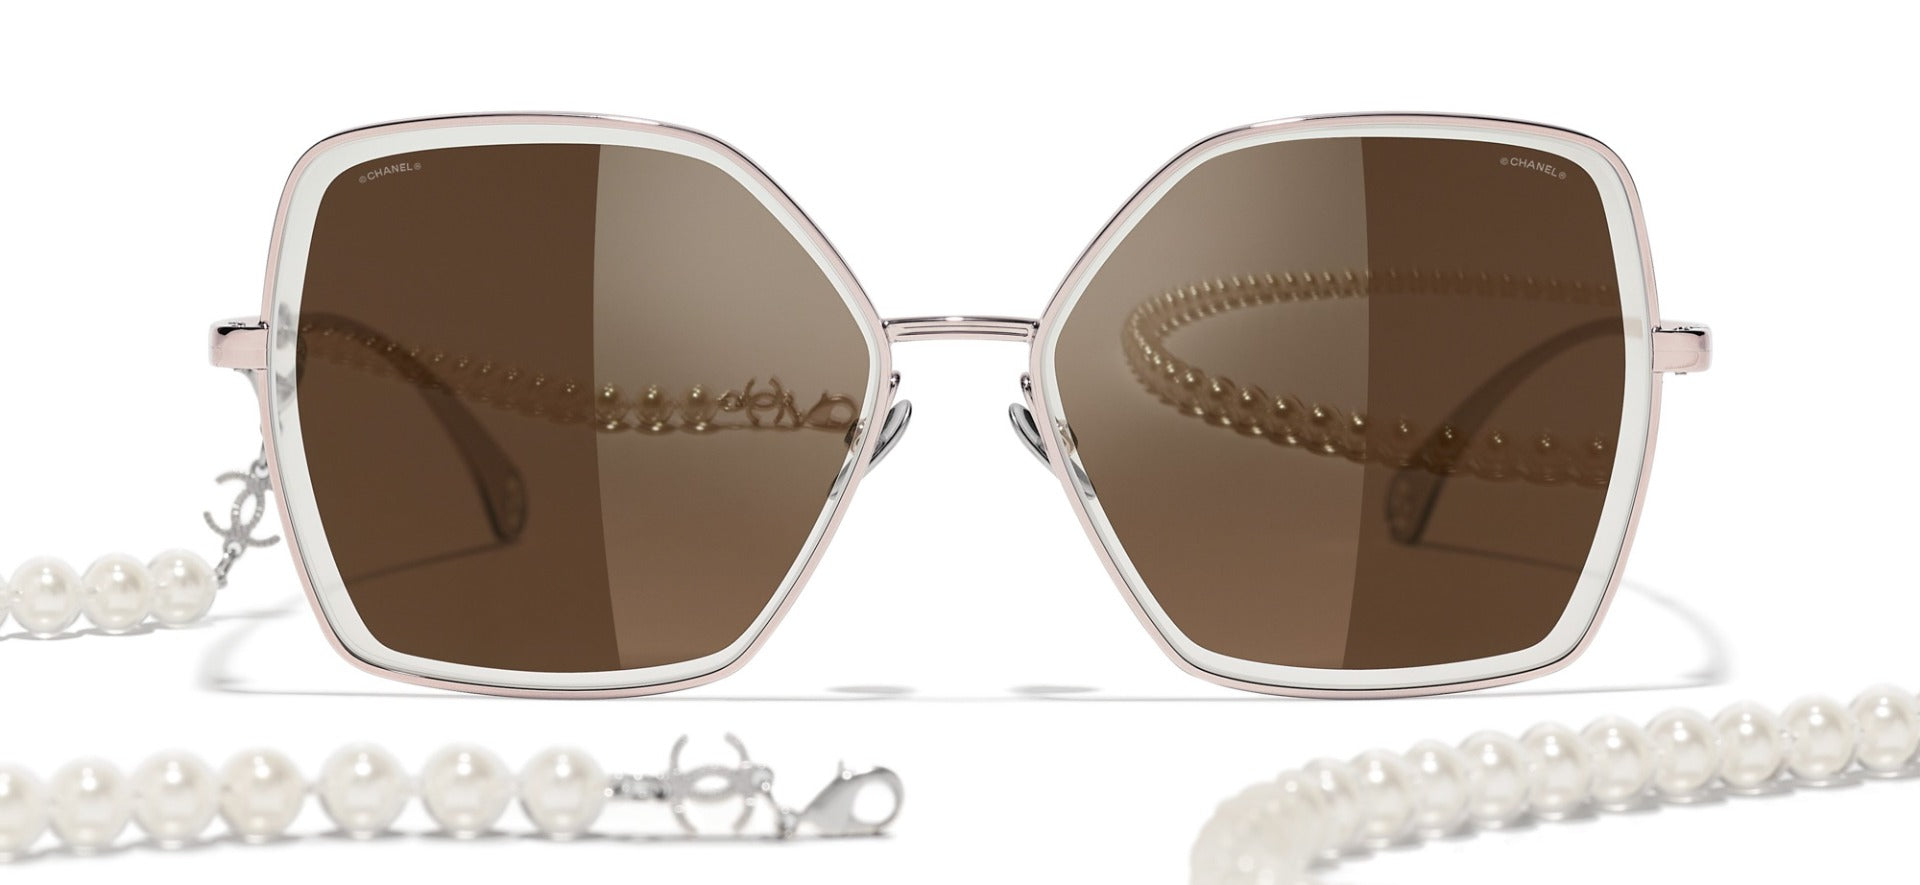 Chanel SS2013 Black Sunglasses with Faux Pearls 6038H